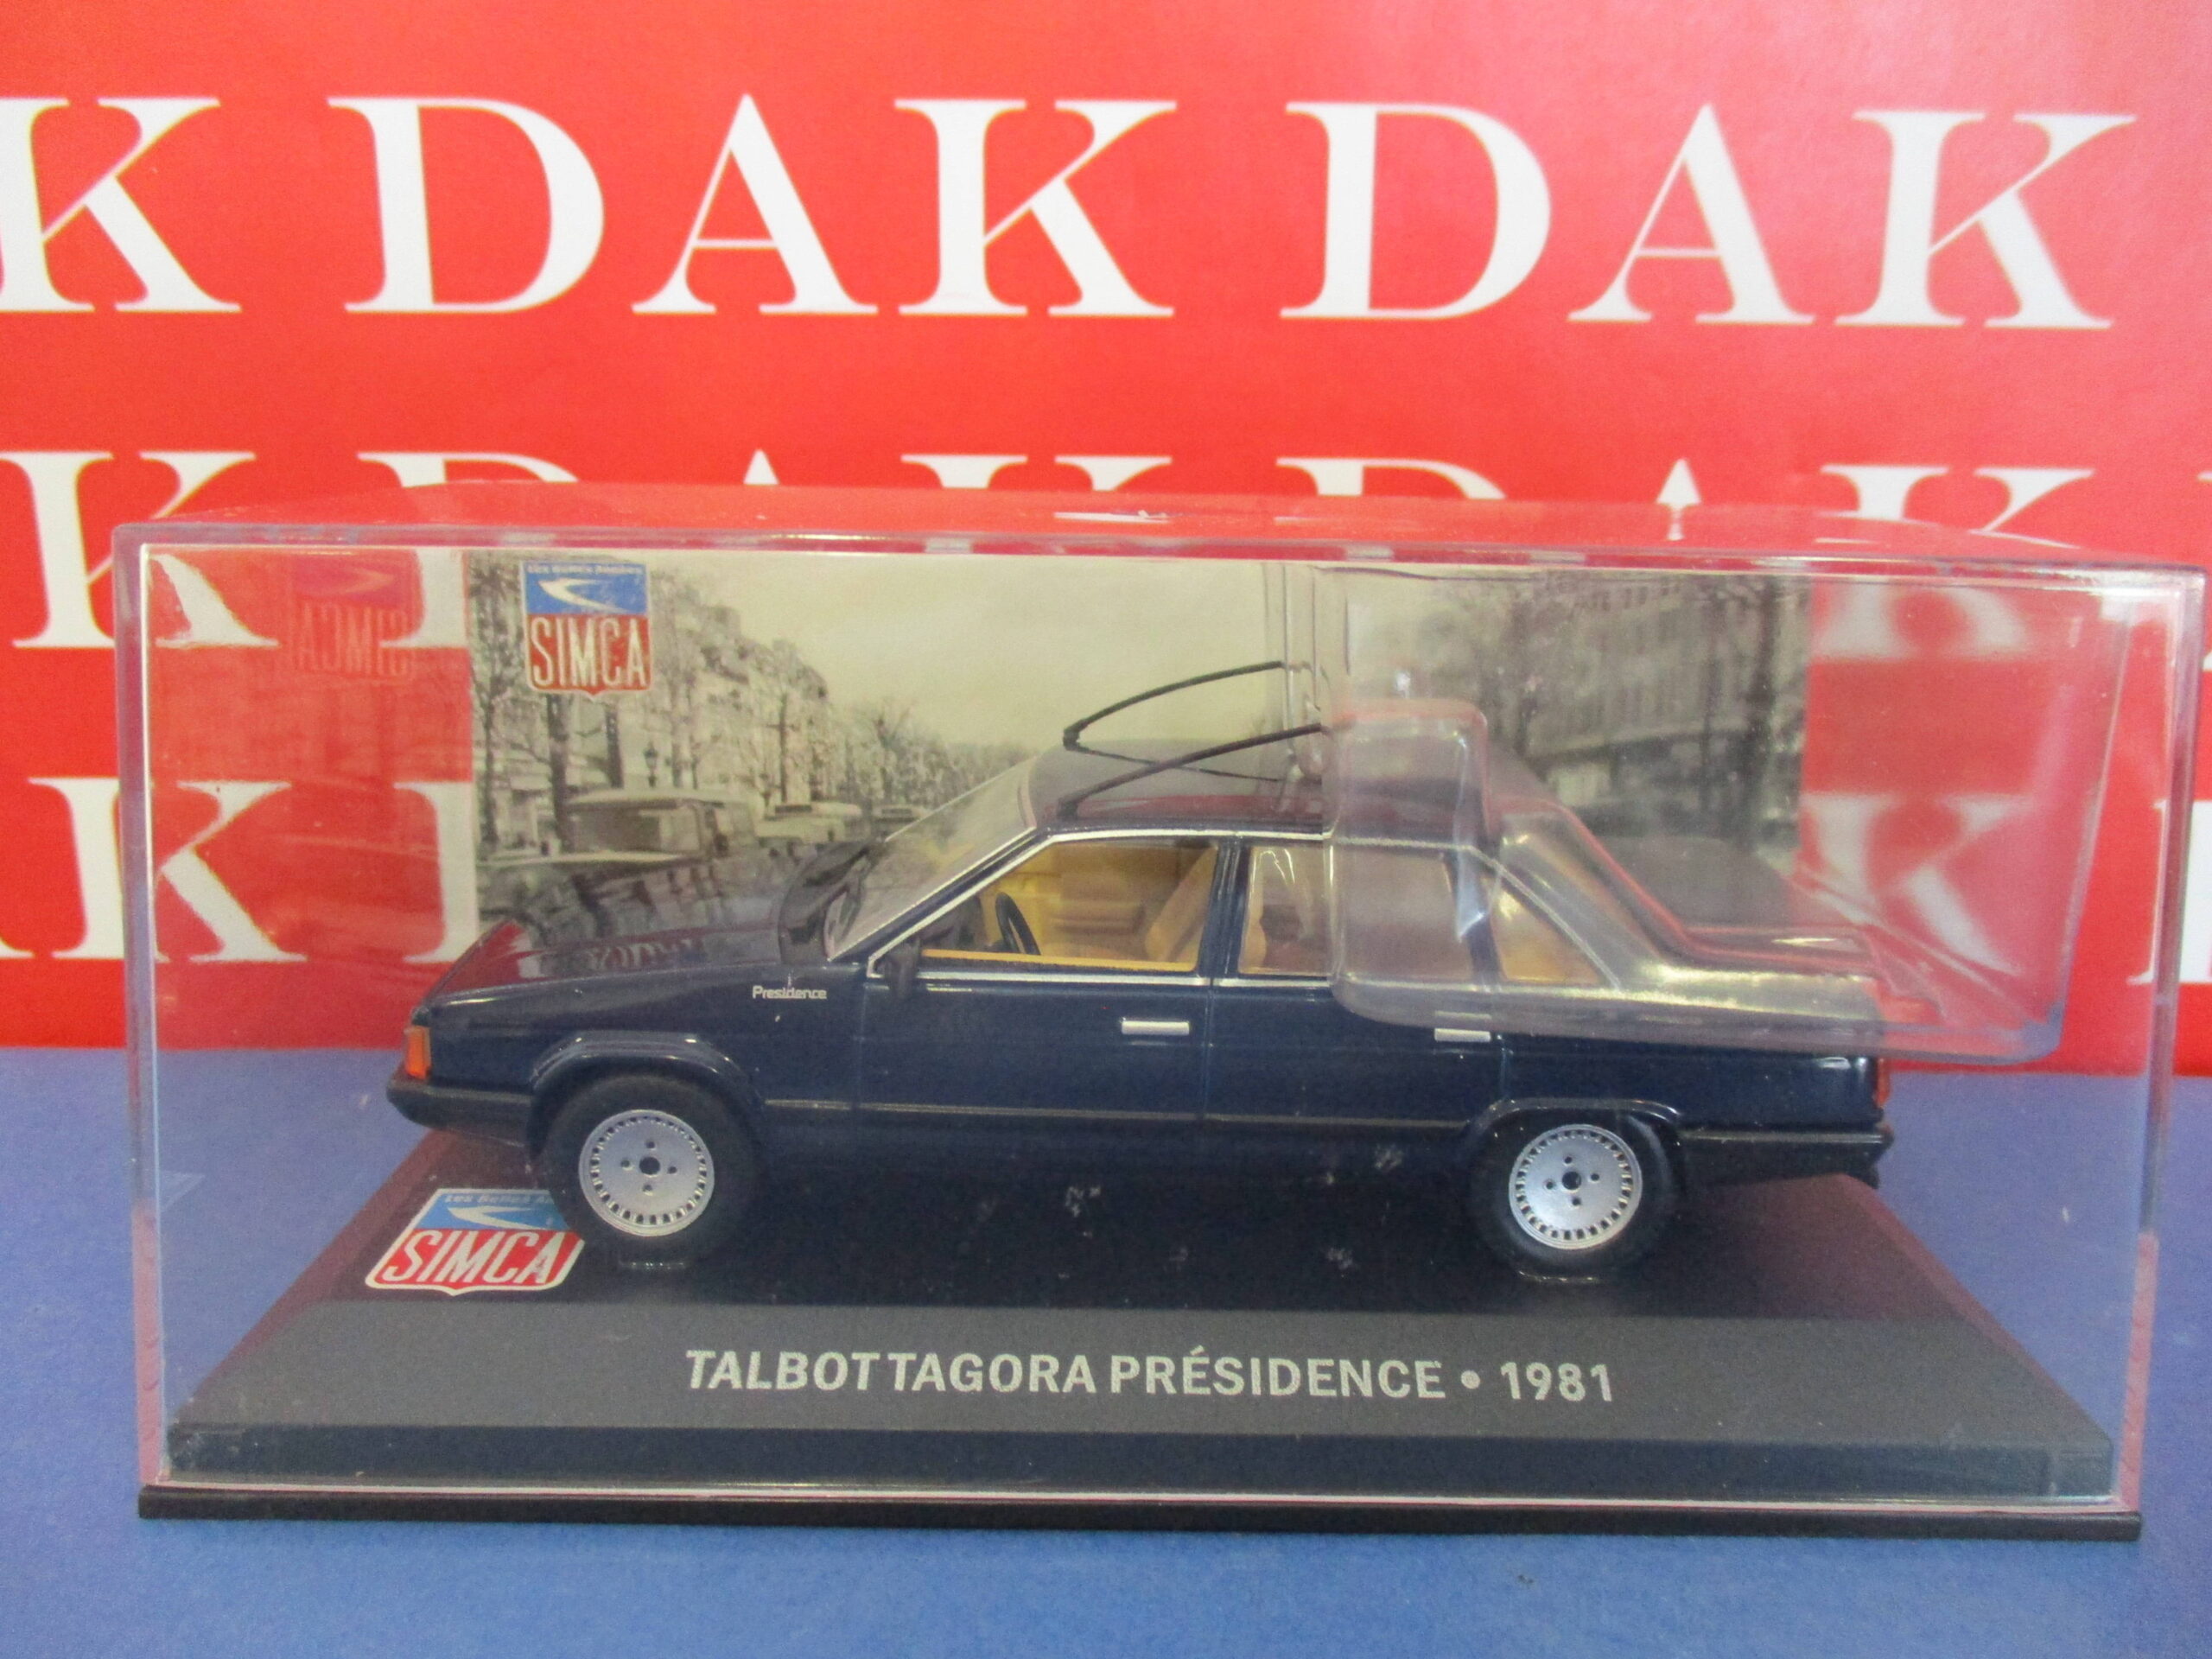 W82 Talbot Tagora Presidence 1981 1/43 Scale Tracked 48 Post 